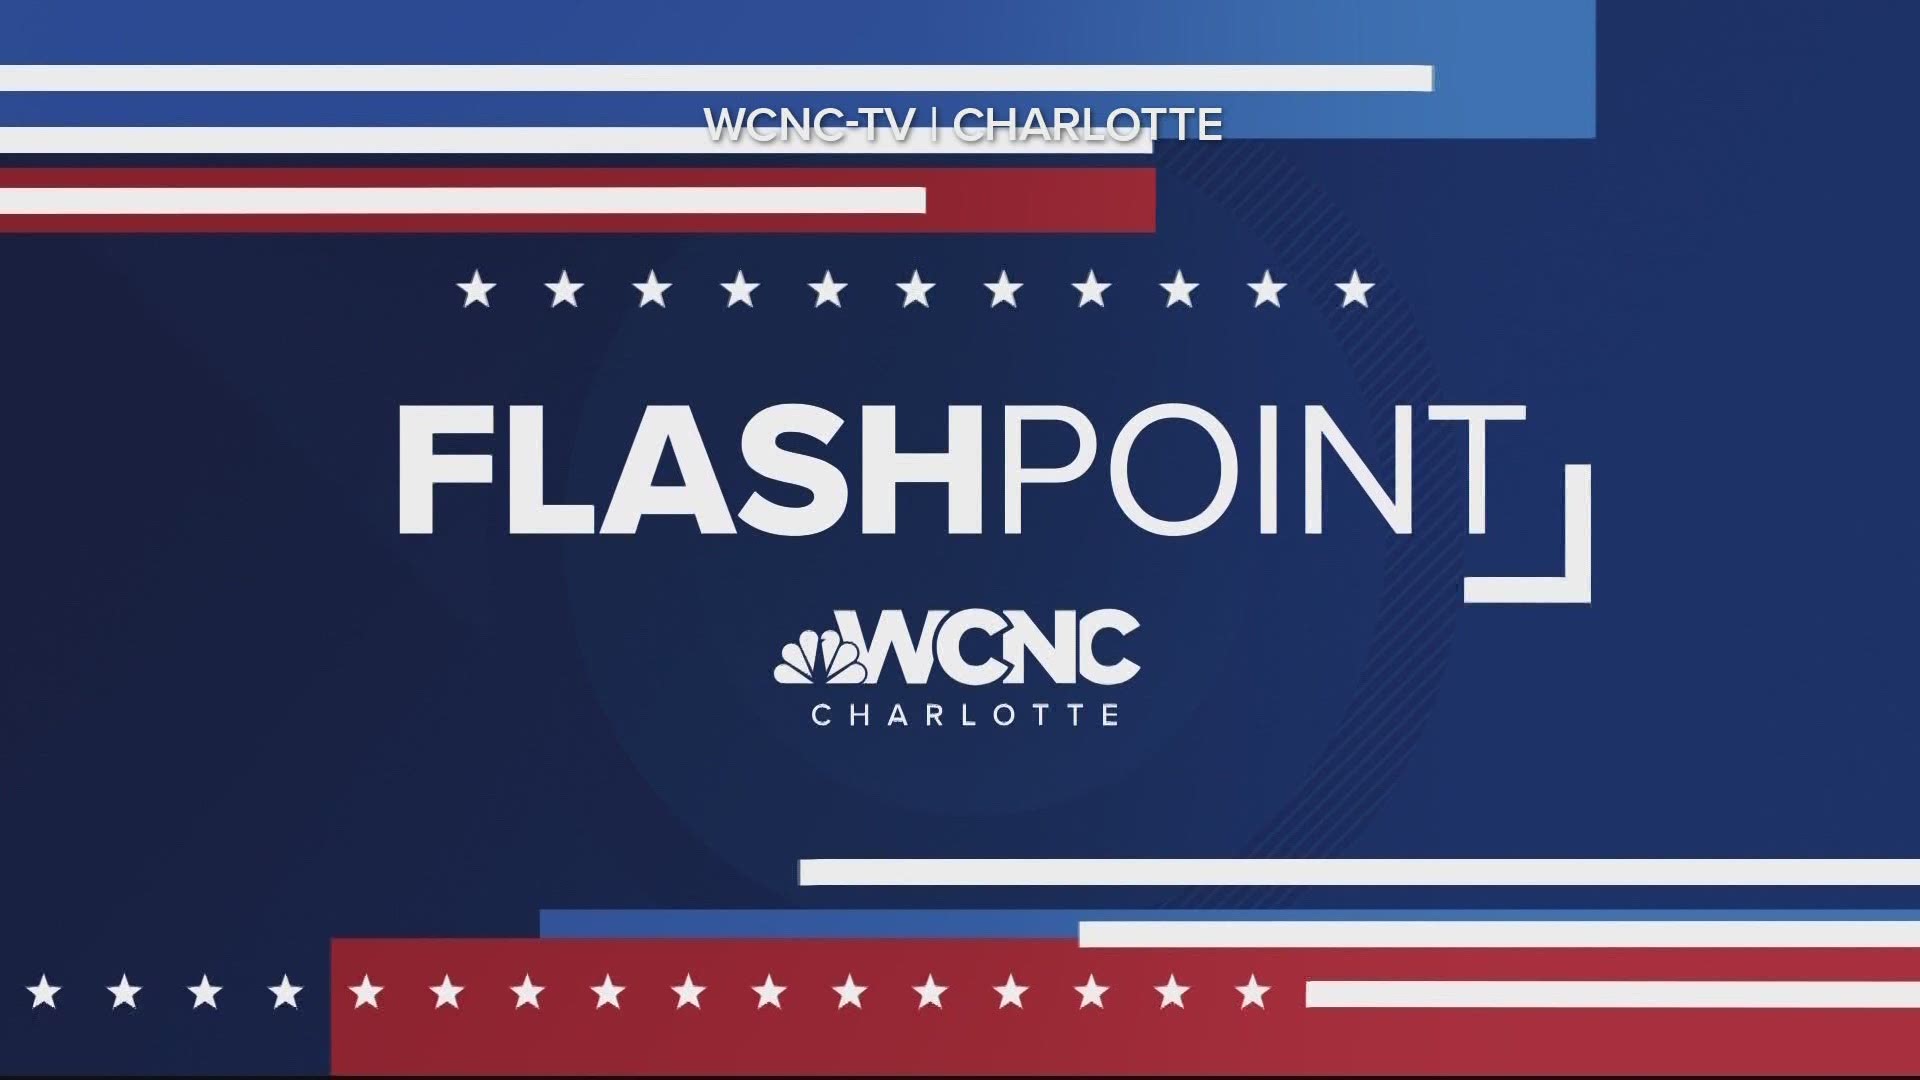 Flashpoint 8/30: State representative Chaz Beasley and former Vice-Chairman of the NCGOP, Wayne King push for why their nominee should be elected in November.